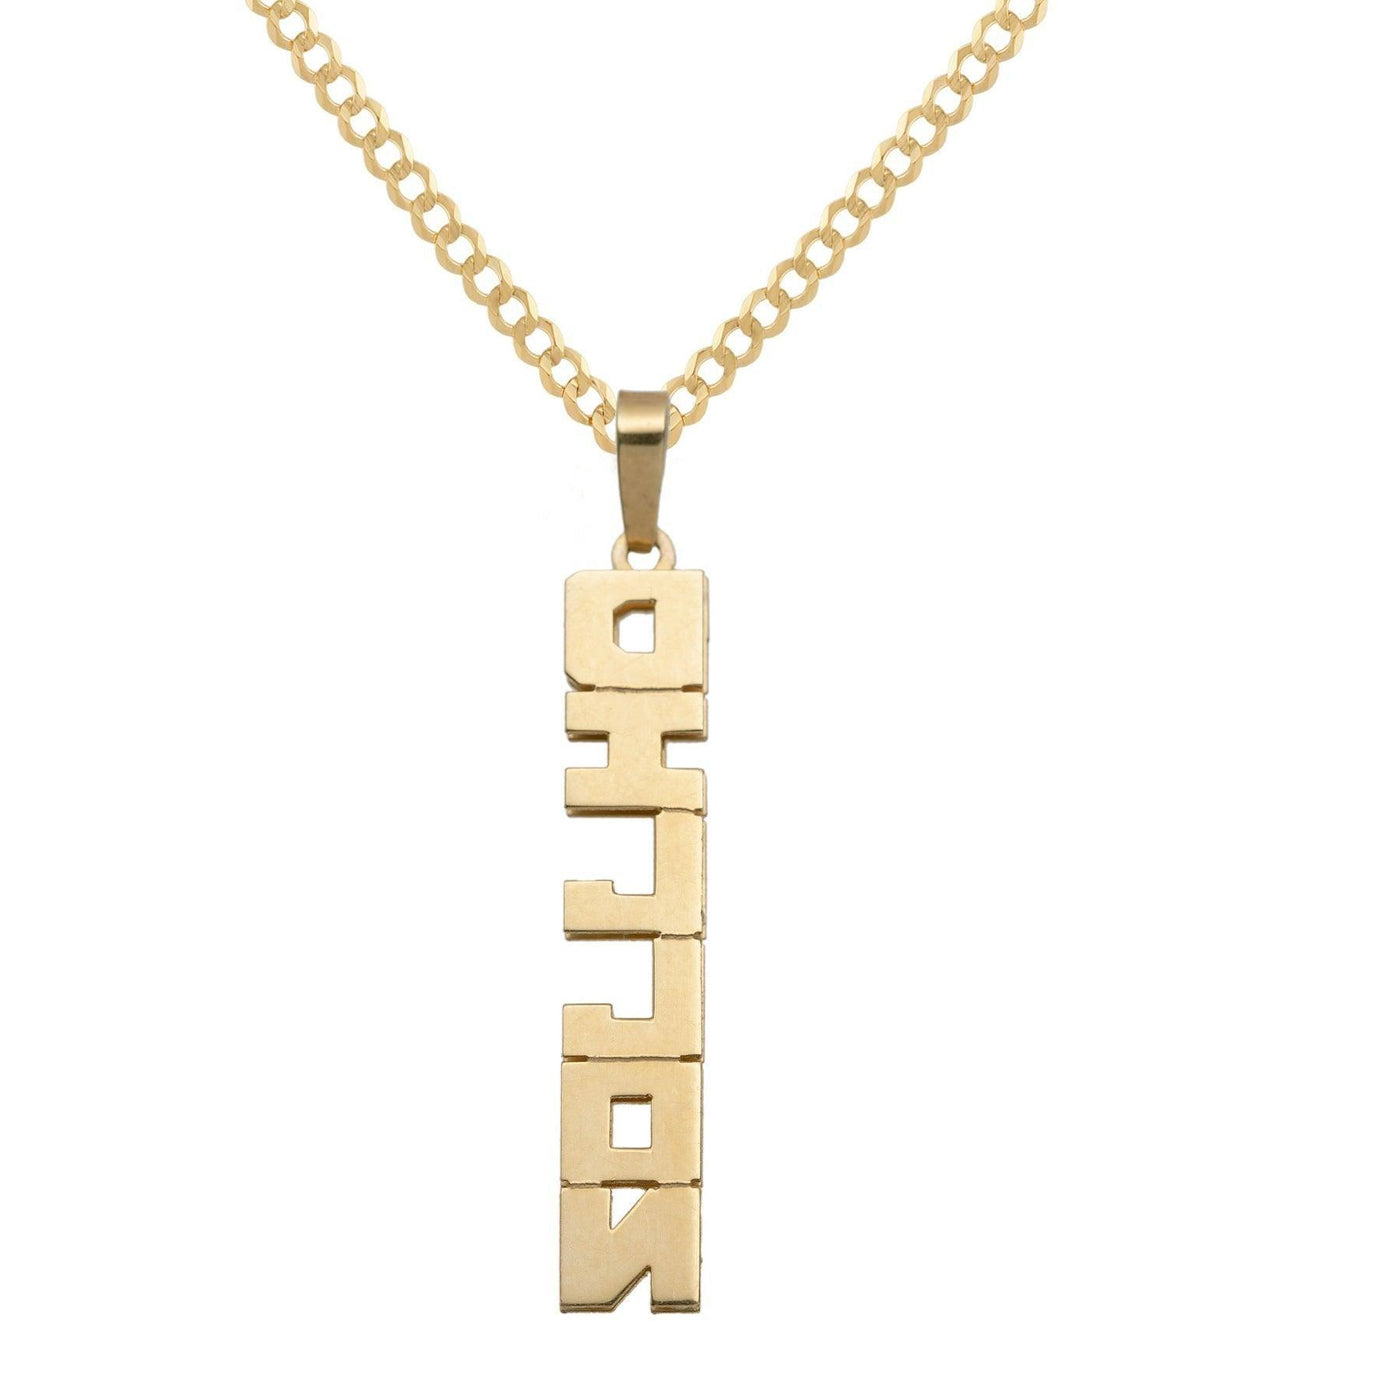 Ladies Vertical Script Name Plate Necklace 14K Gold - Style 95 - bayamjewelry